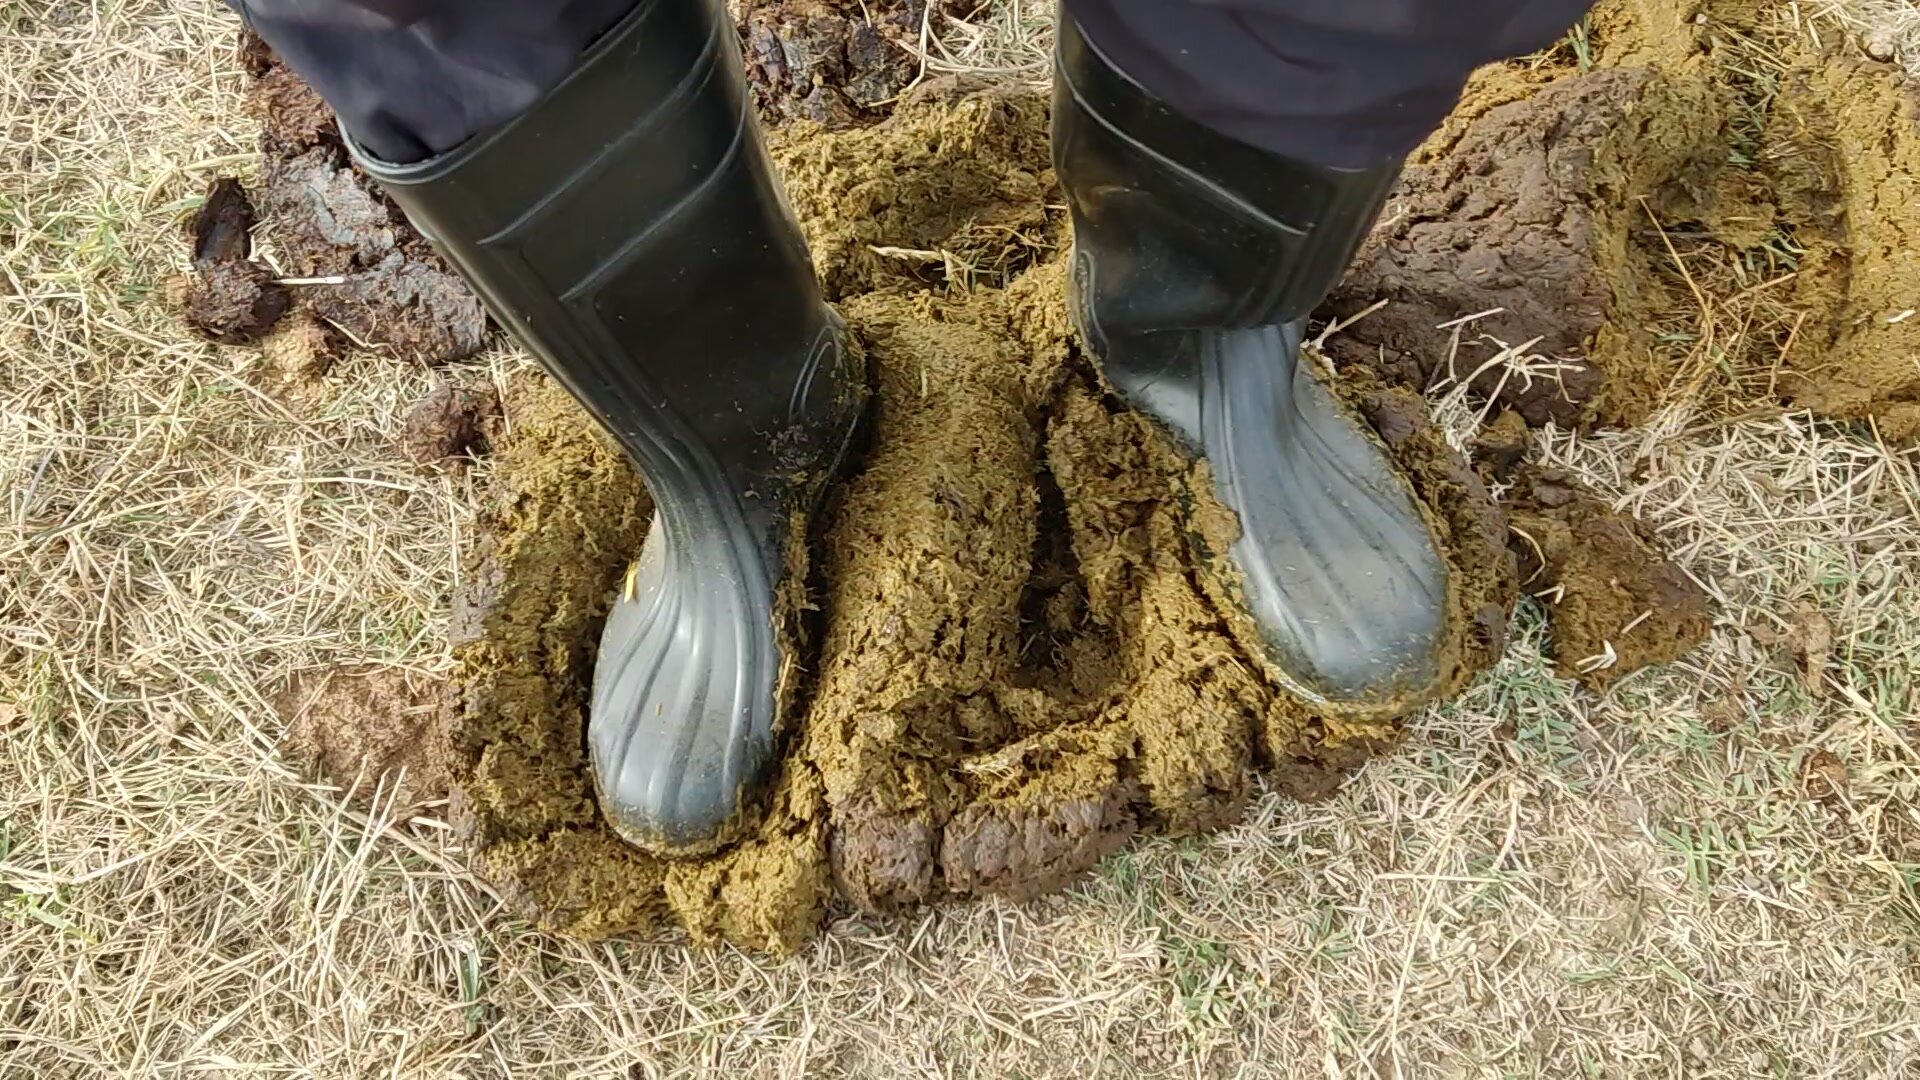 Rubber boots vs cowshit - video 54